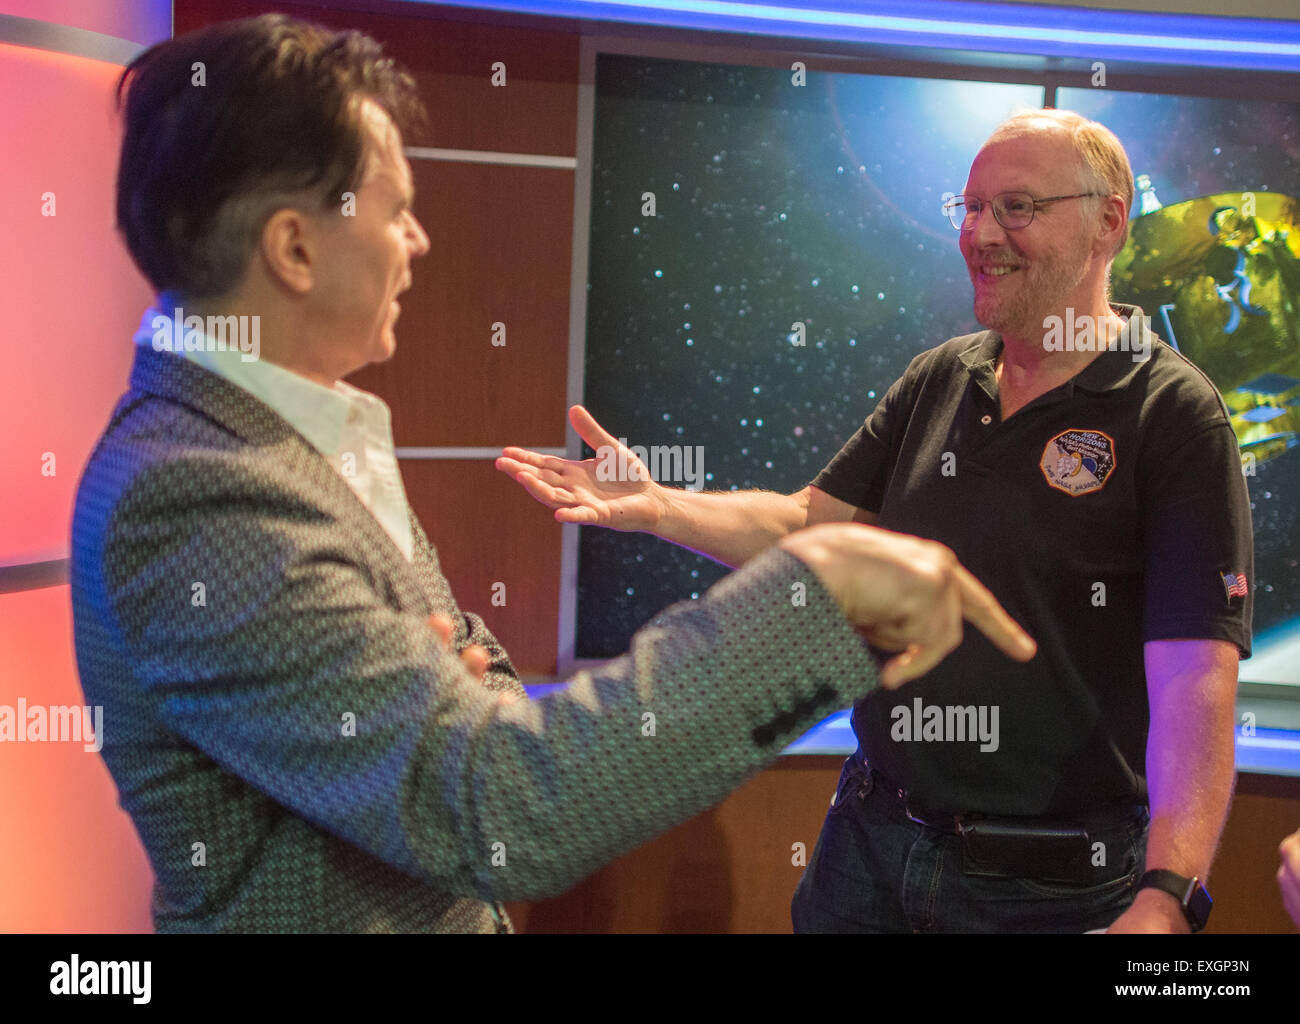 Mark Showalter, right, who discovered Pluto's moon Styx in 2012, speaks with Lawrence Gowen of the band Styx, Wednesday, July 1, 2015 at The Johns Hopkins University Applied Physics Laboratory in Laurel, Md.  Members of the band Styx visited with New Horizons team members and received a tour of the mission operations center. Stock Photo